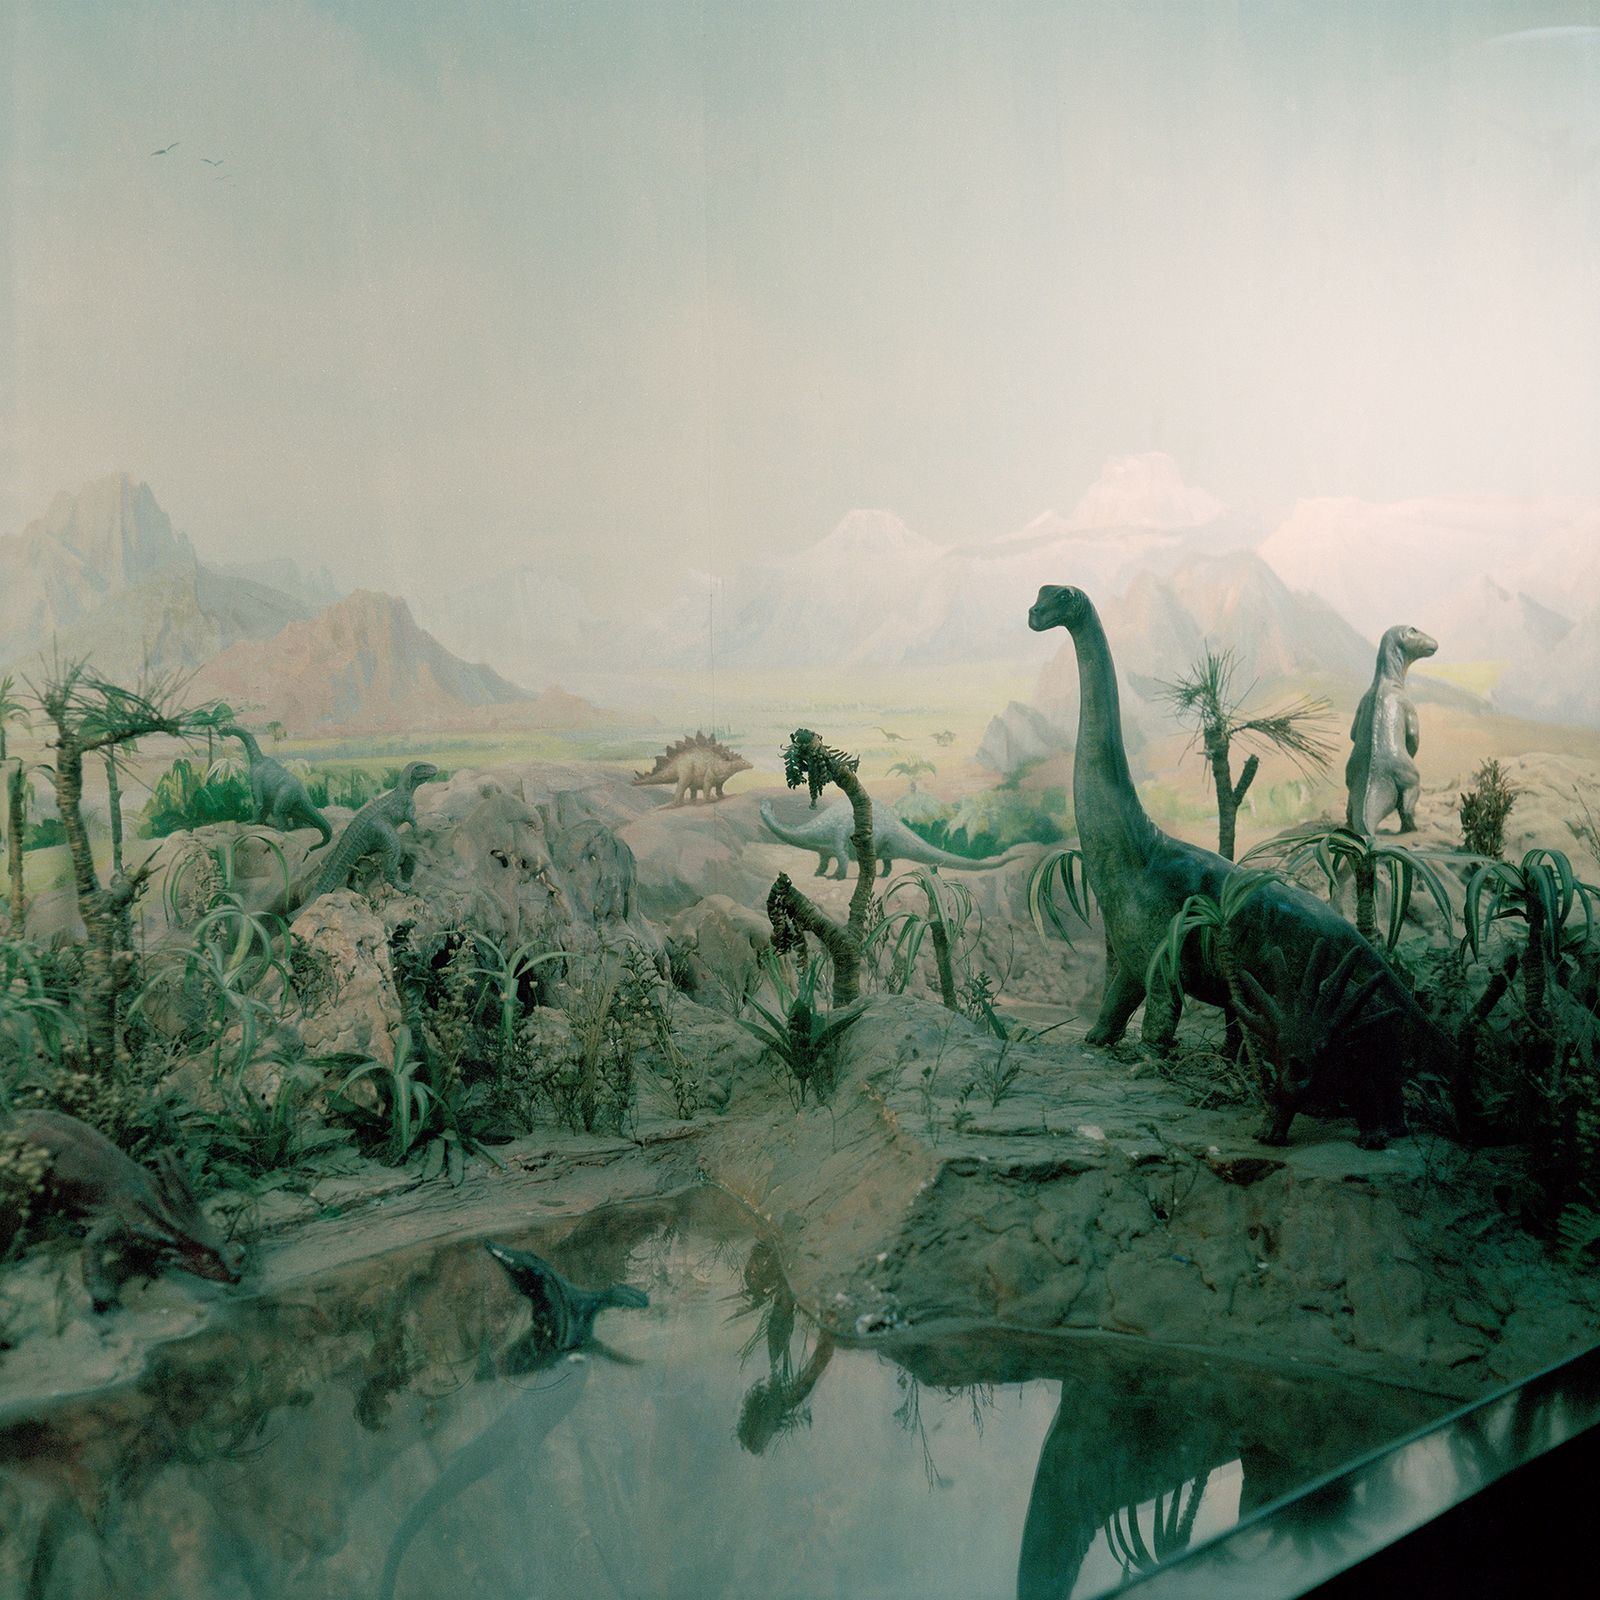 © Gabriela Gleizer - Image from the In The Museum of Nature photography project